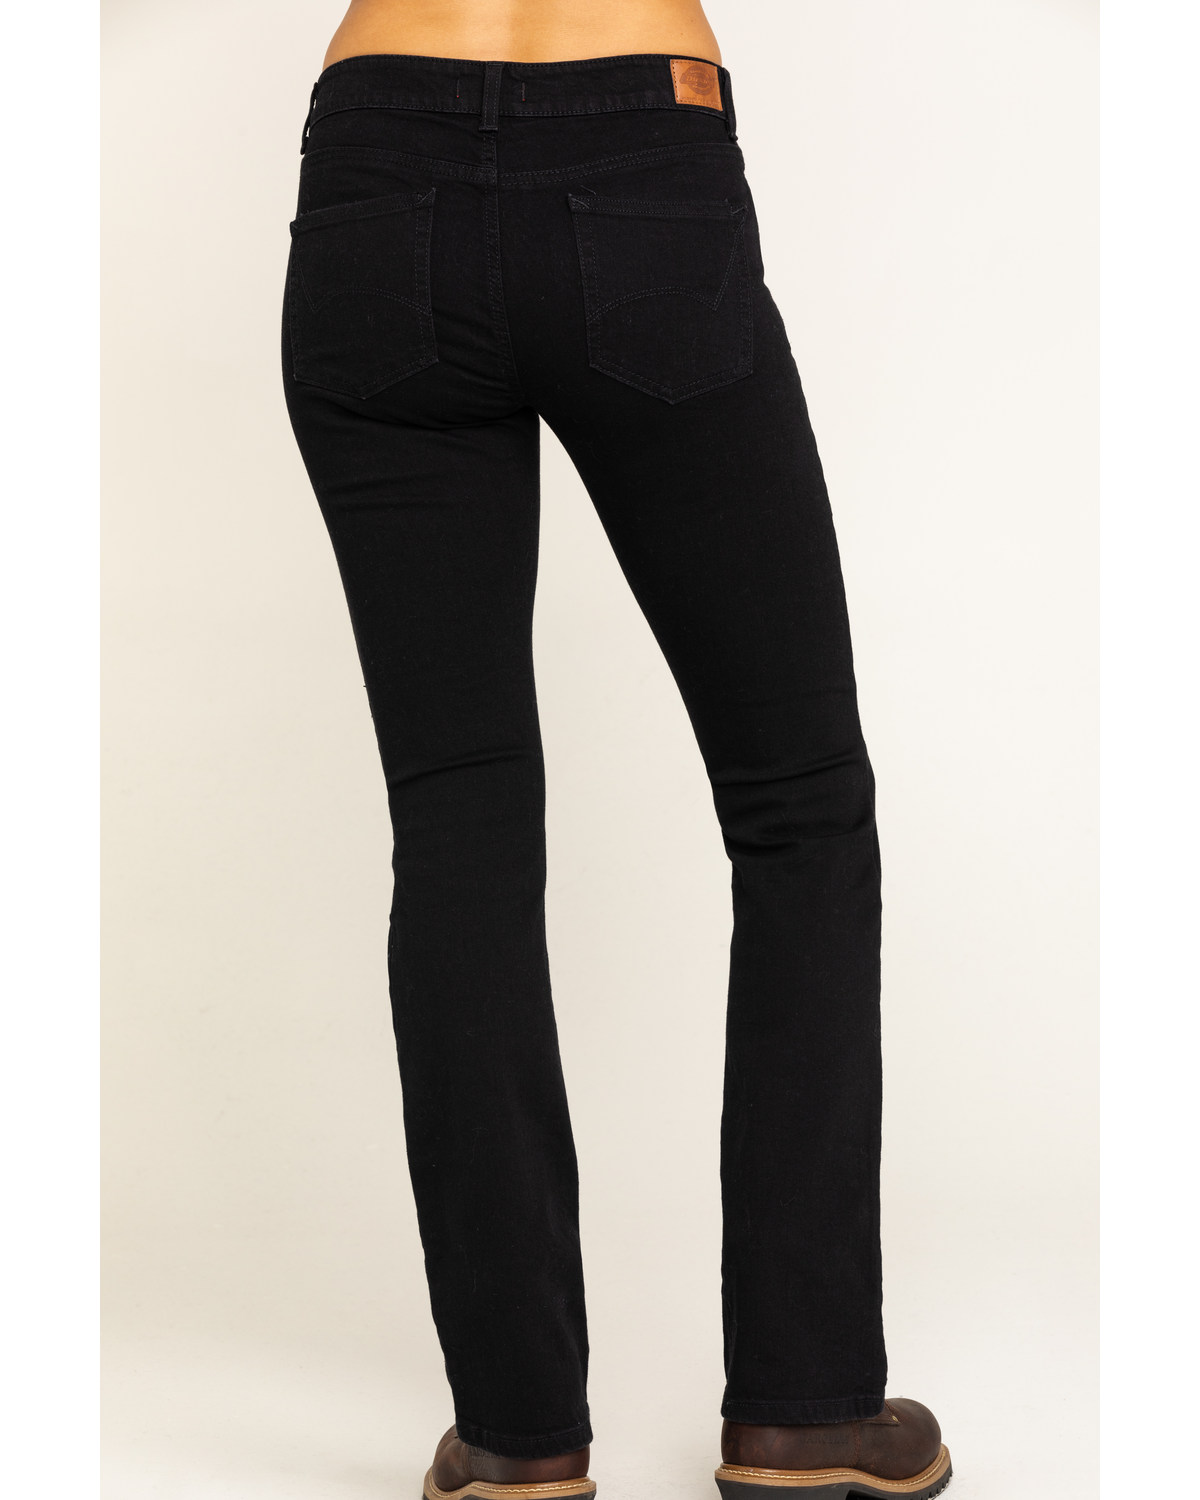 bootcut stretch jeans womens